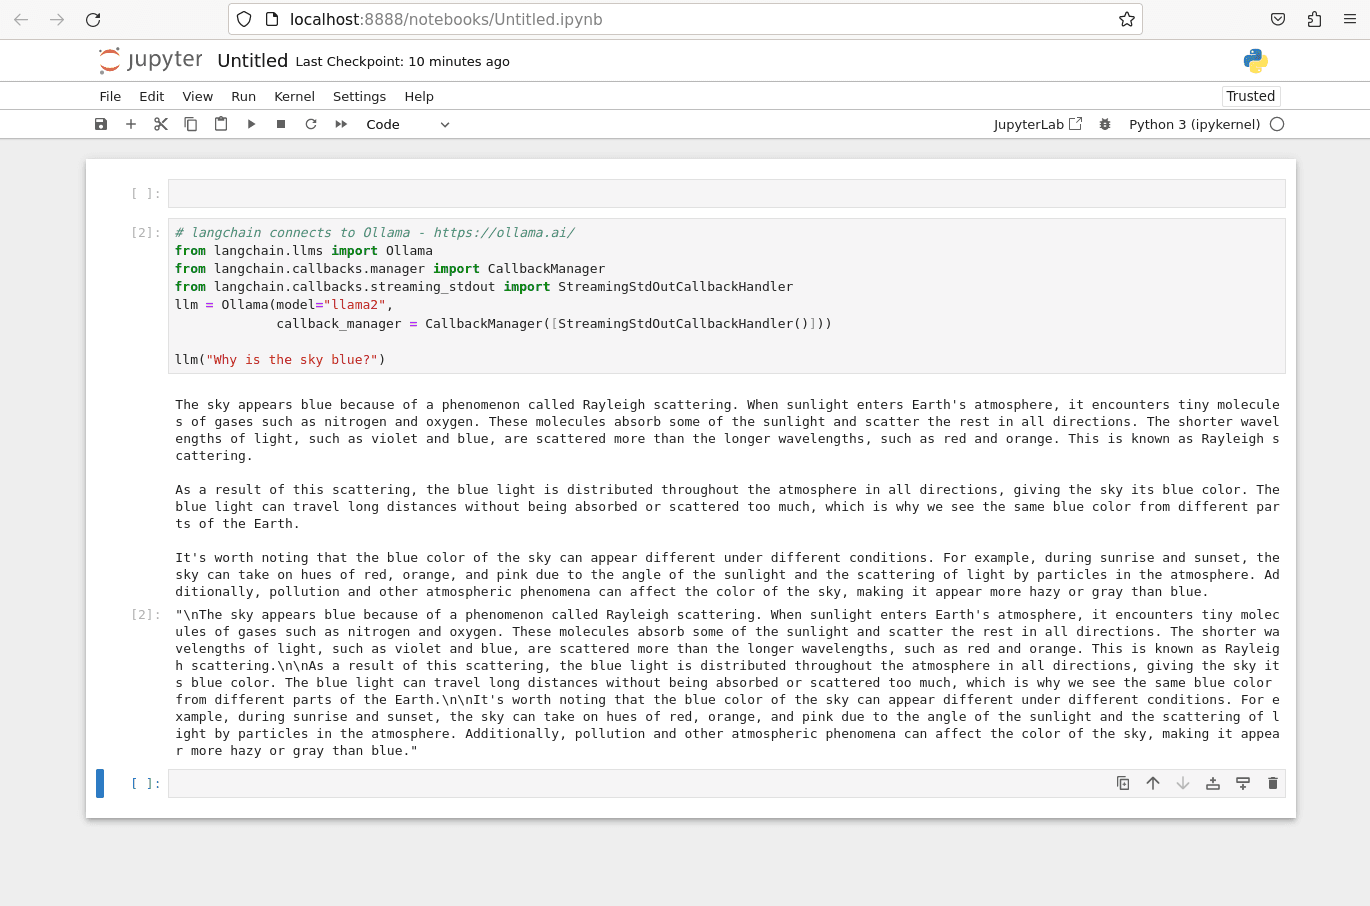 Jupyter notebook with prompt response